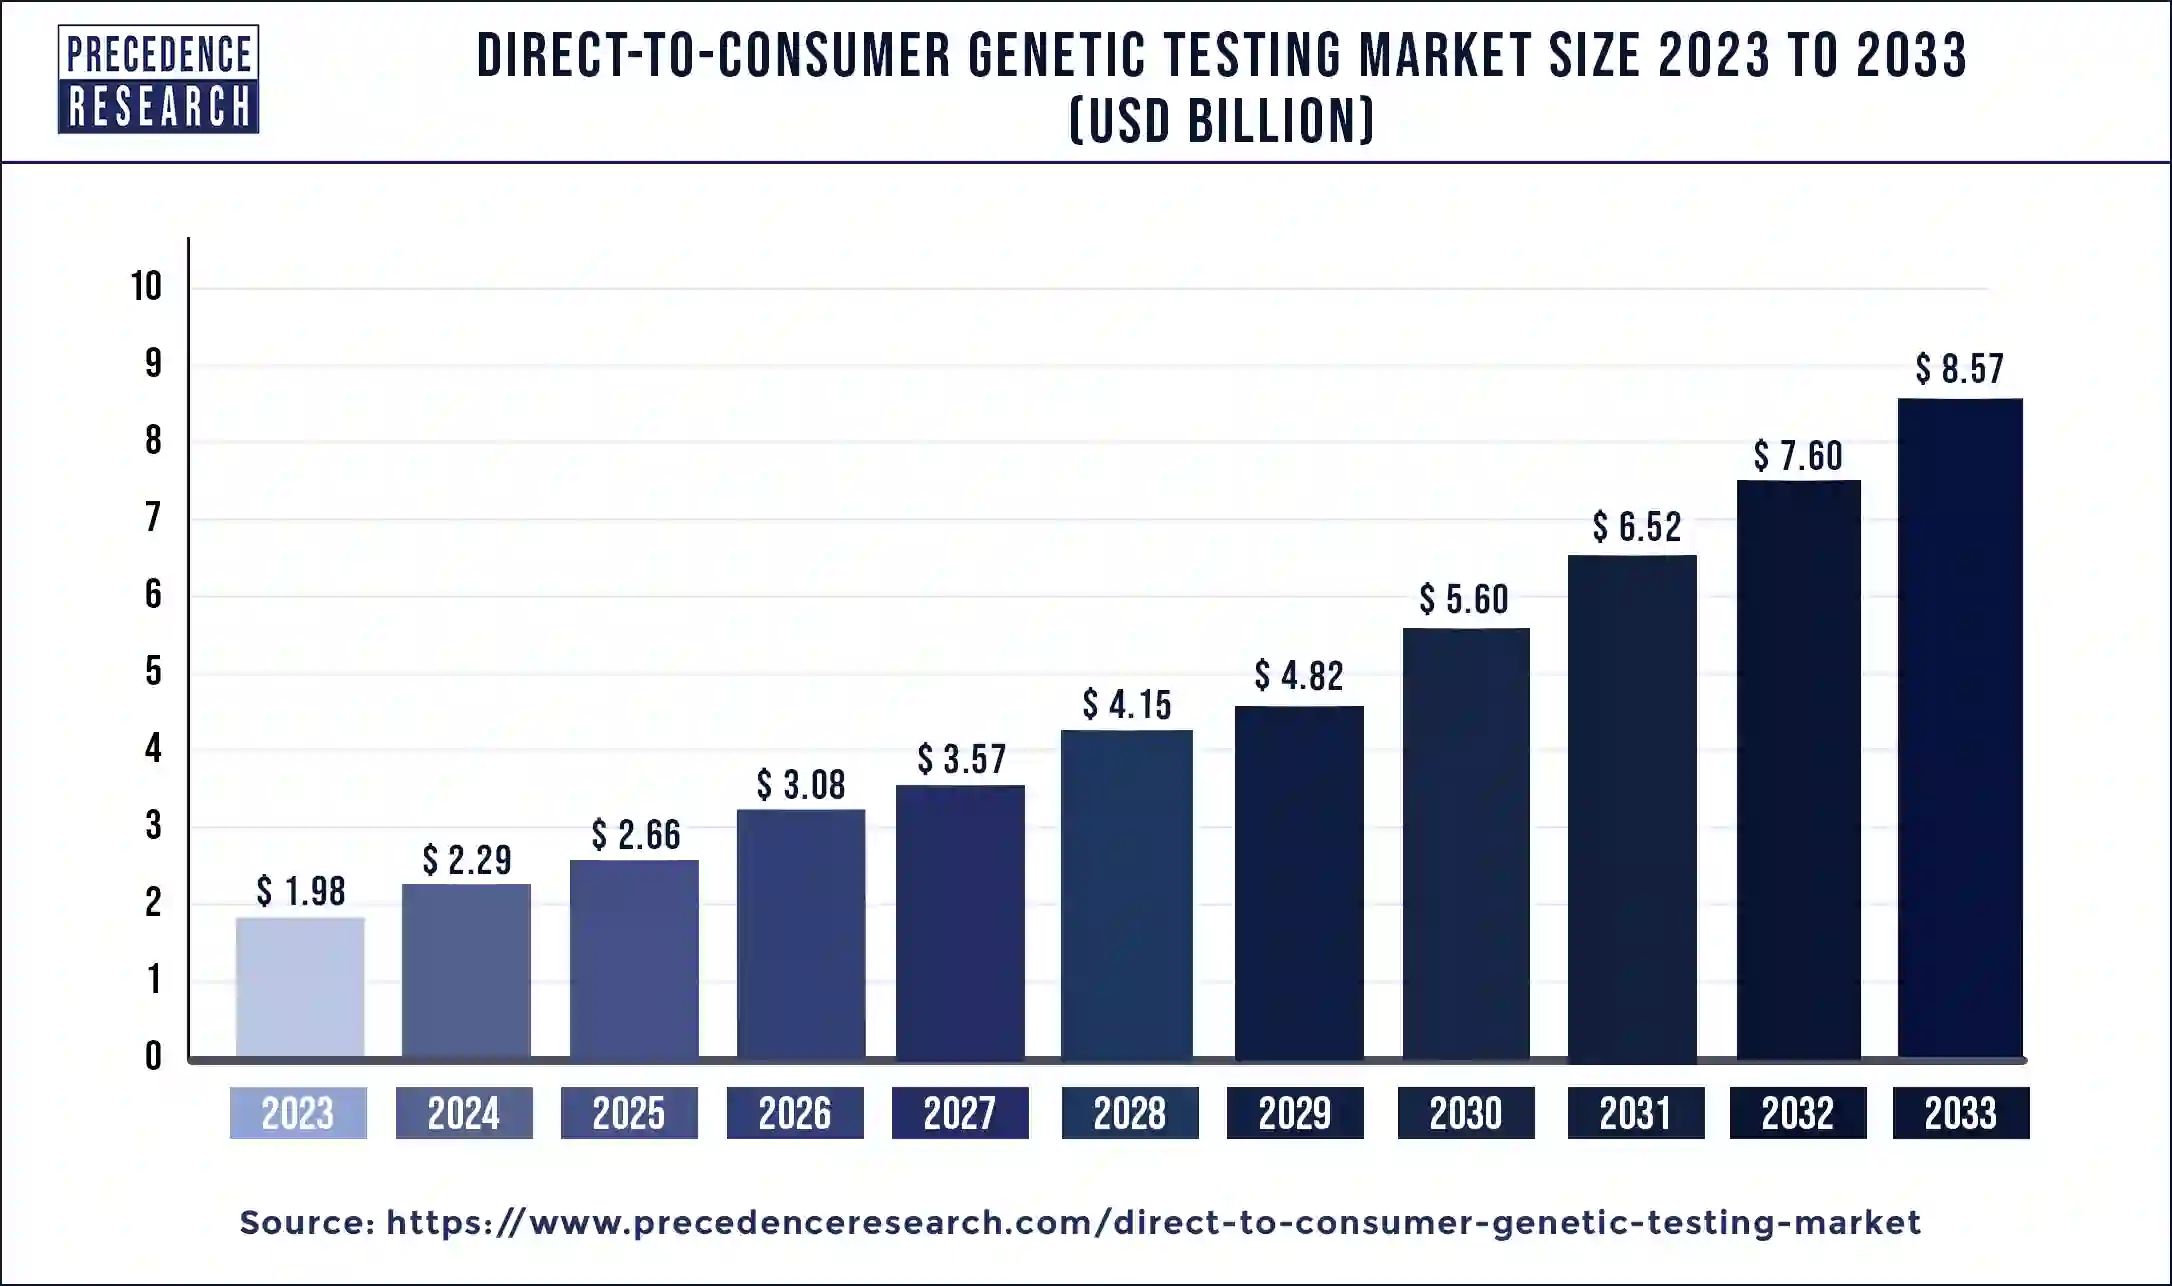 Direct-to-Consumer Genetic Testing Market Size 2024 to 2033